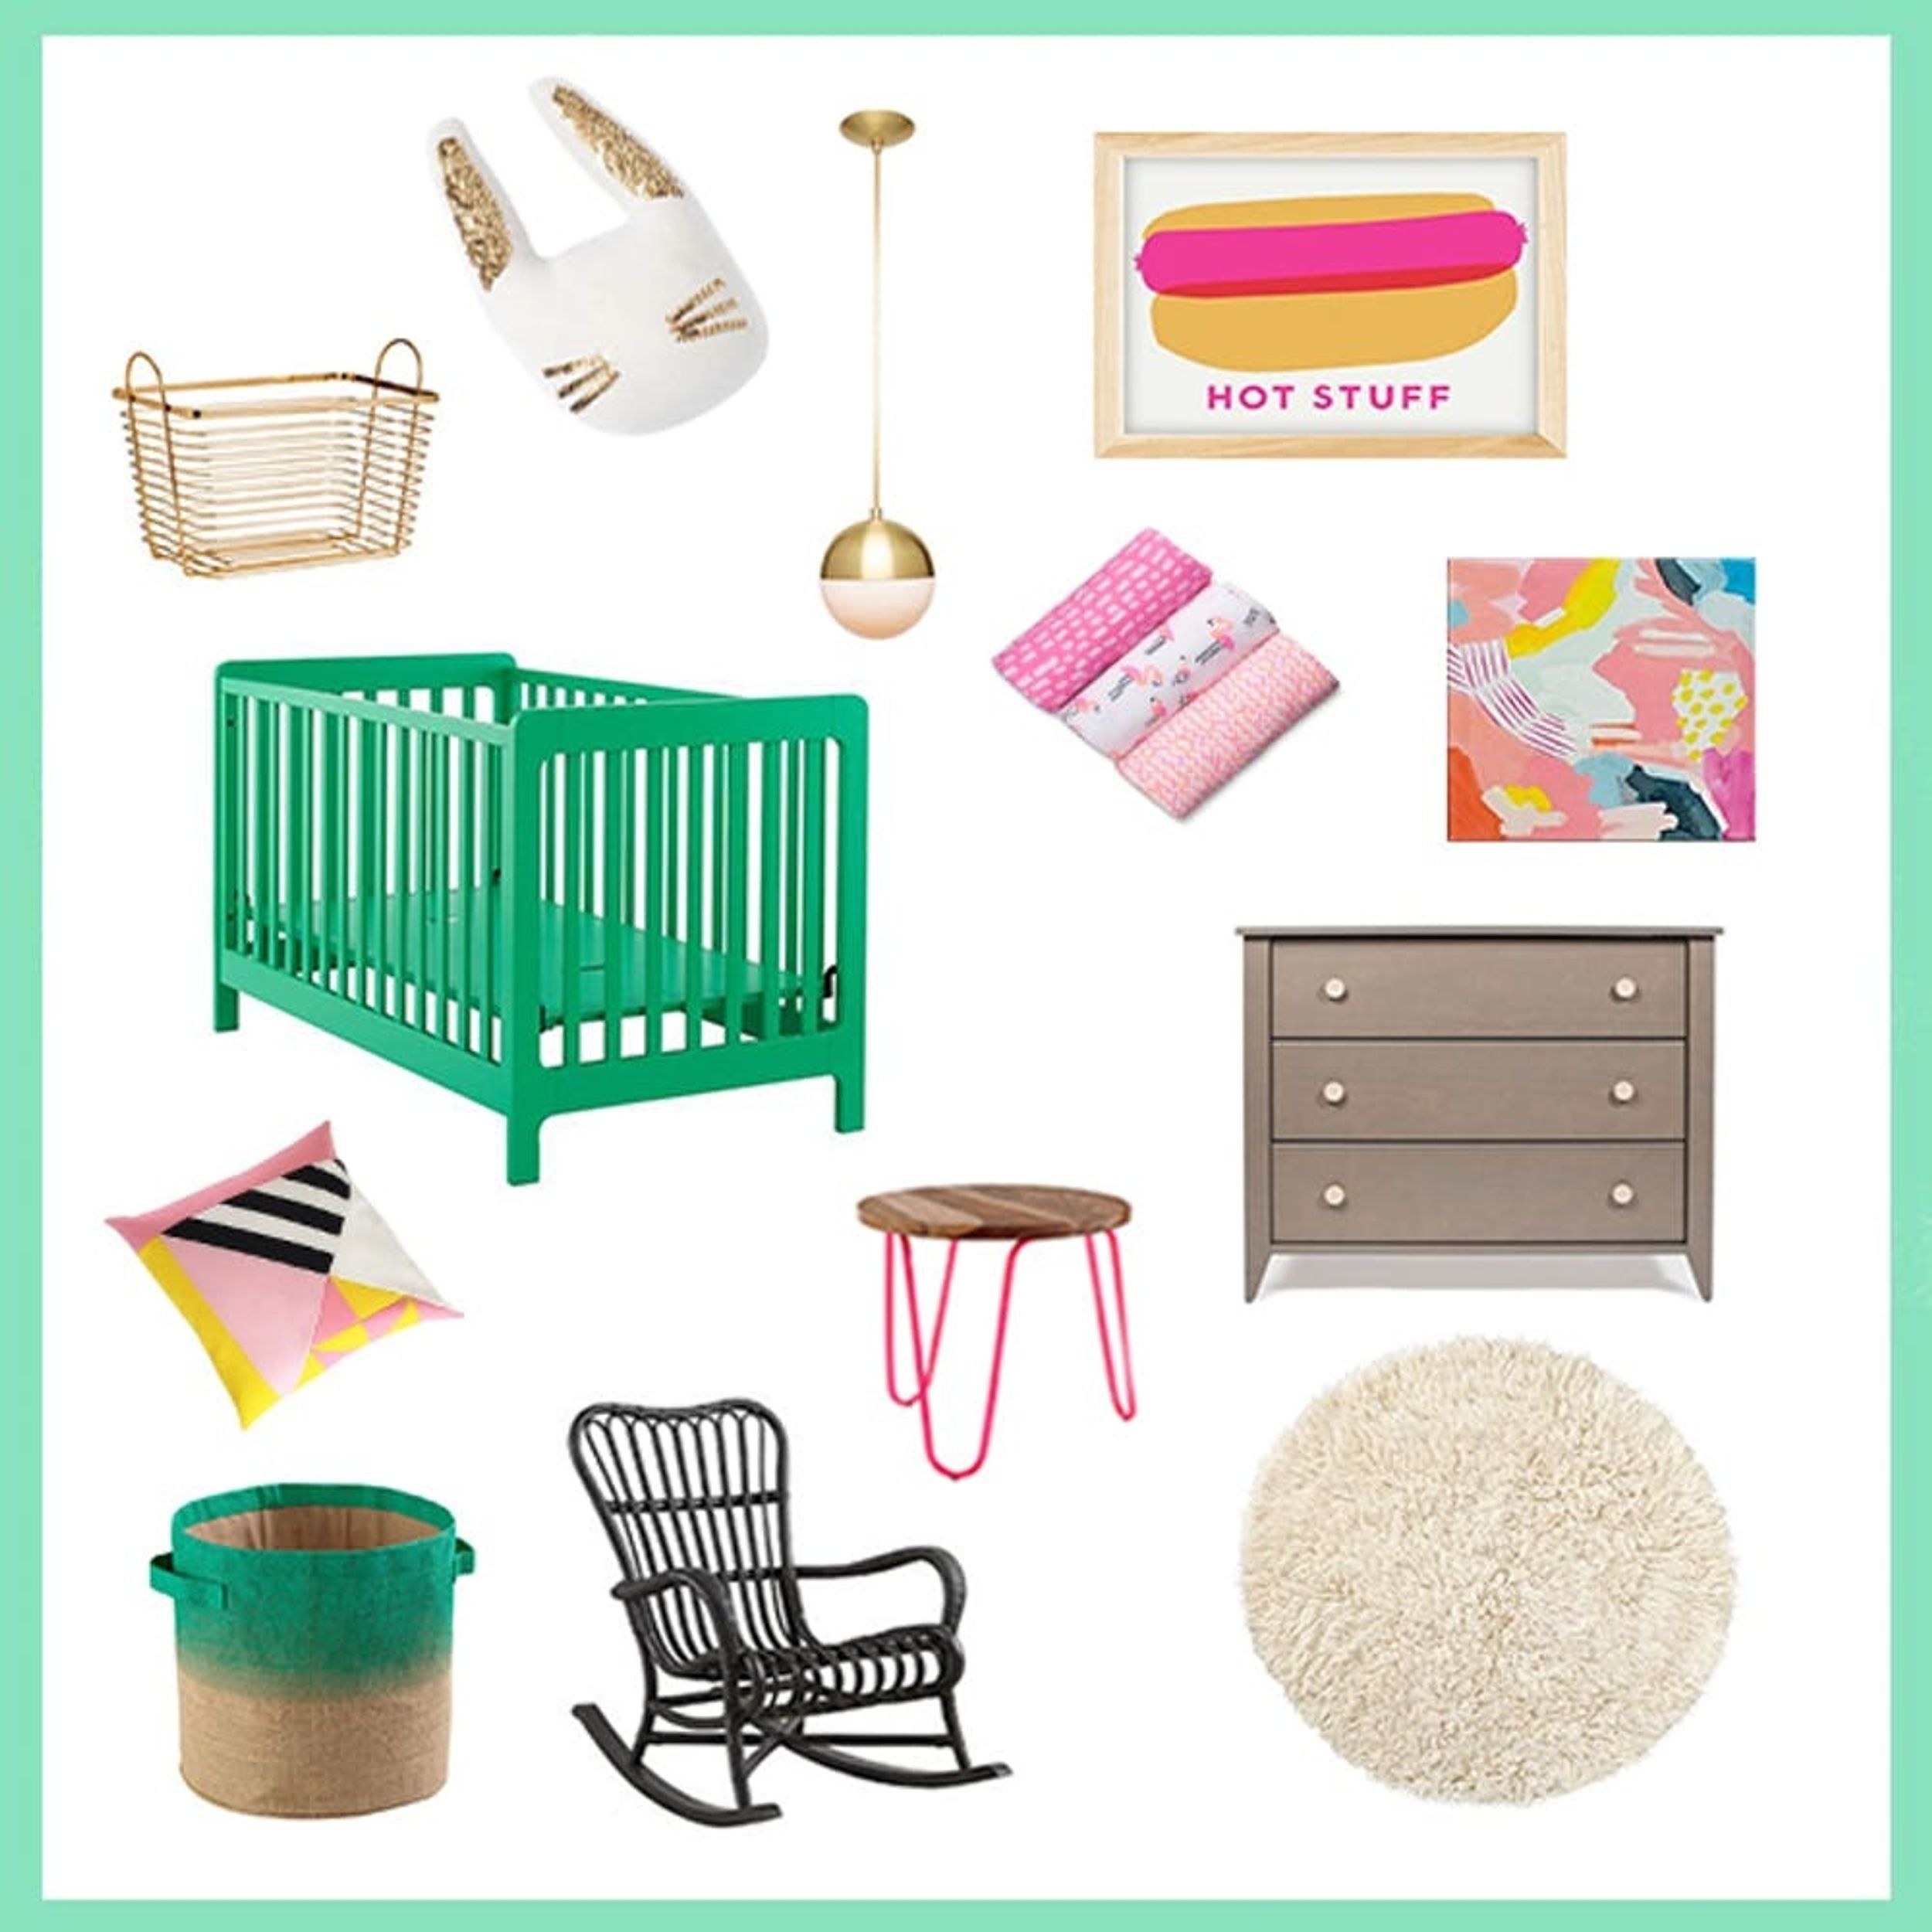 3 Chic and Sensible Ways to Decorate Your Baby’s Nursery